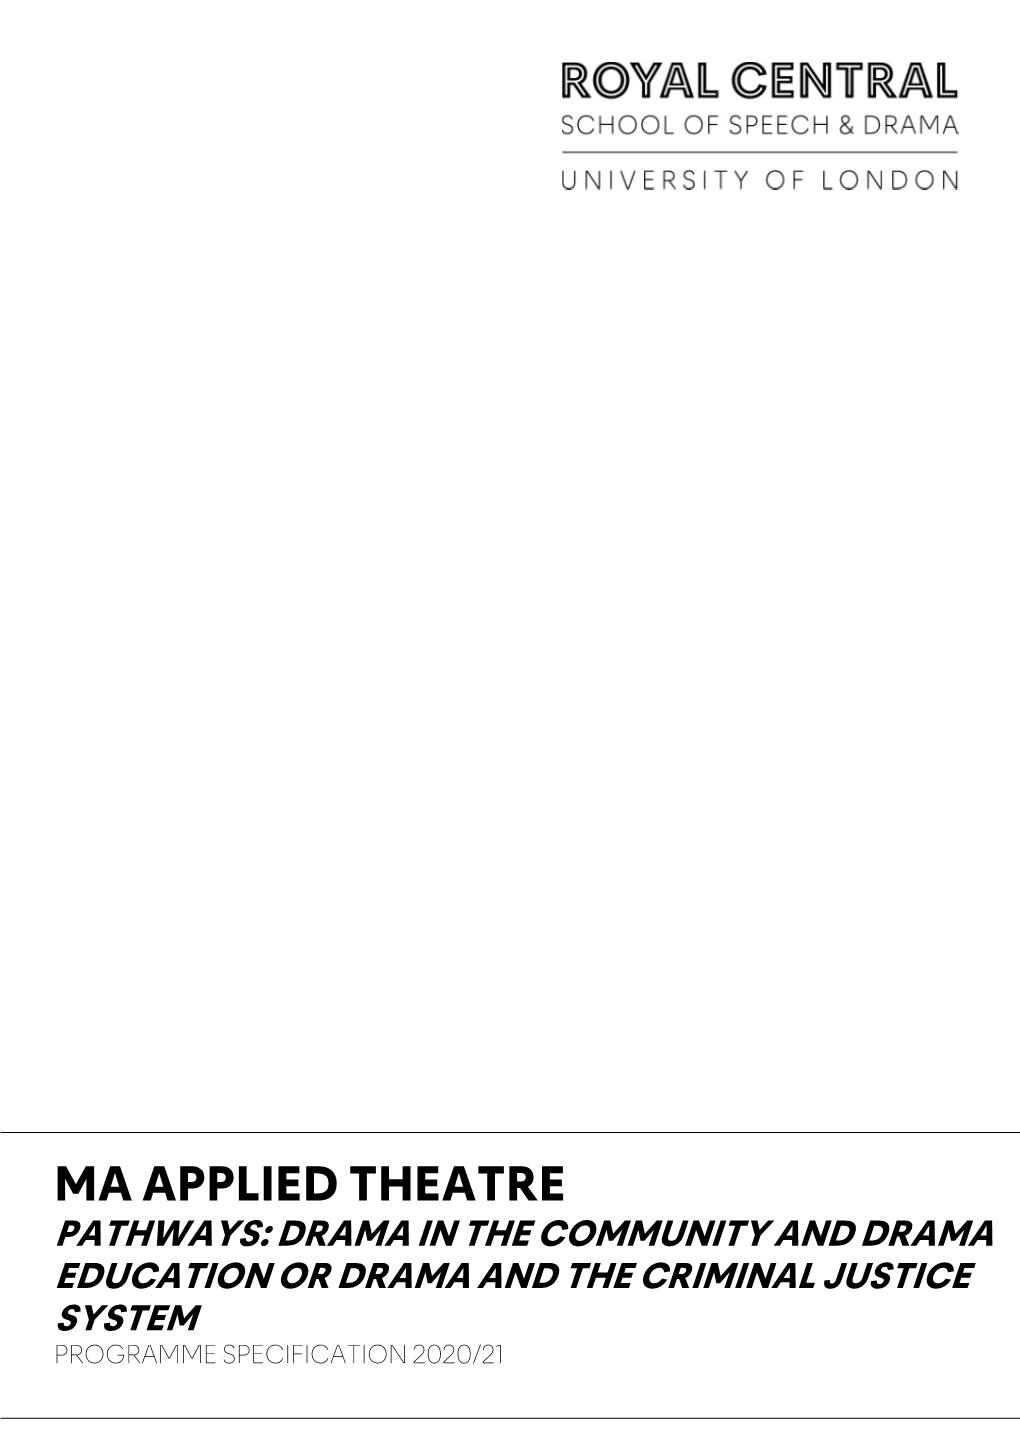 MA APPLIED THEATRE Pathways: Drama in the Community and Drama Education Or Drama and the Criminal Justice System PROGRAMME Specification 2020/21